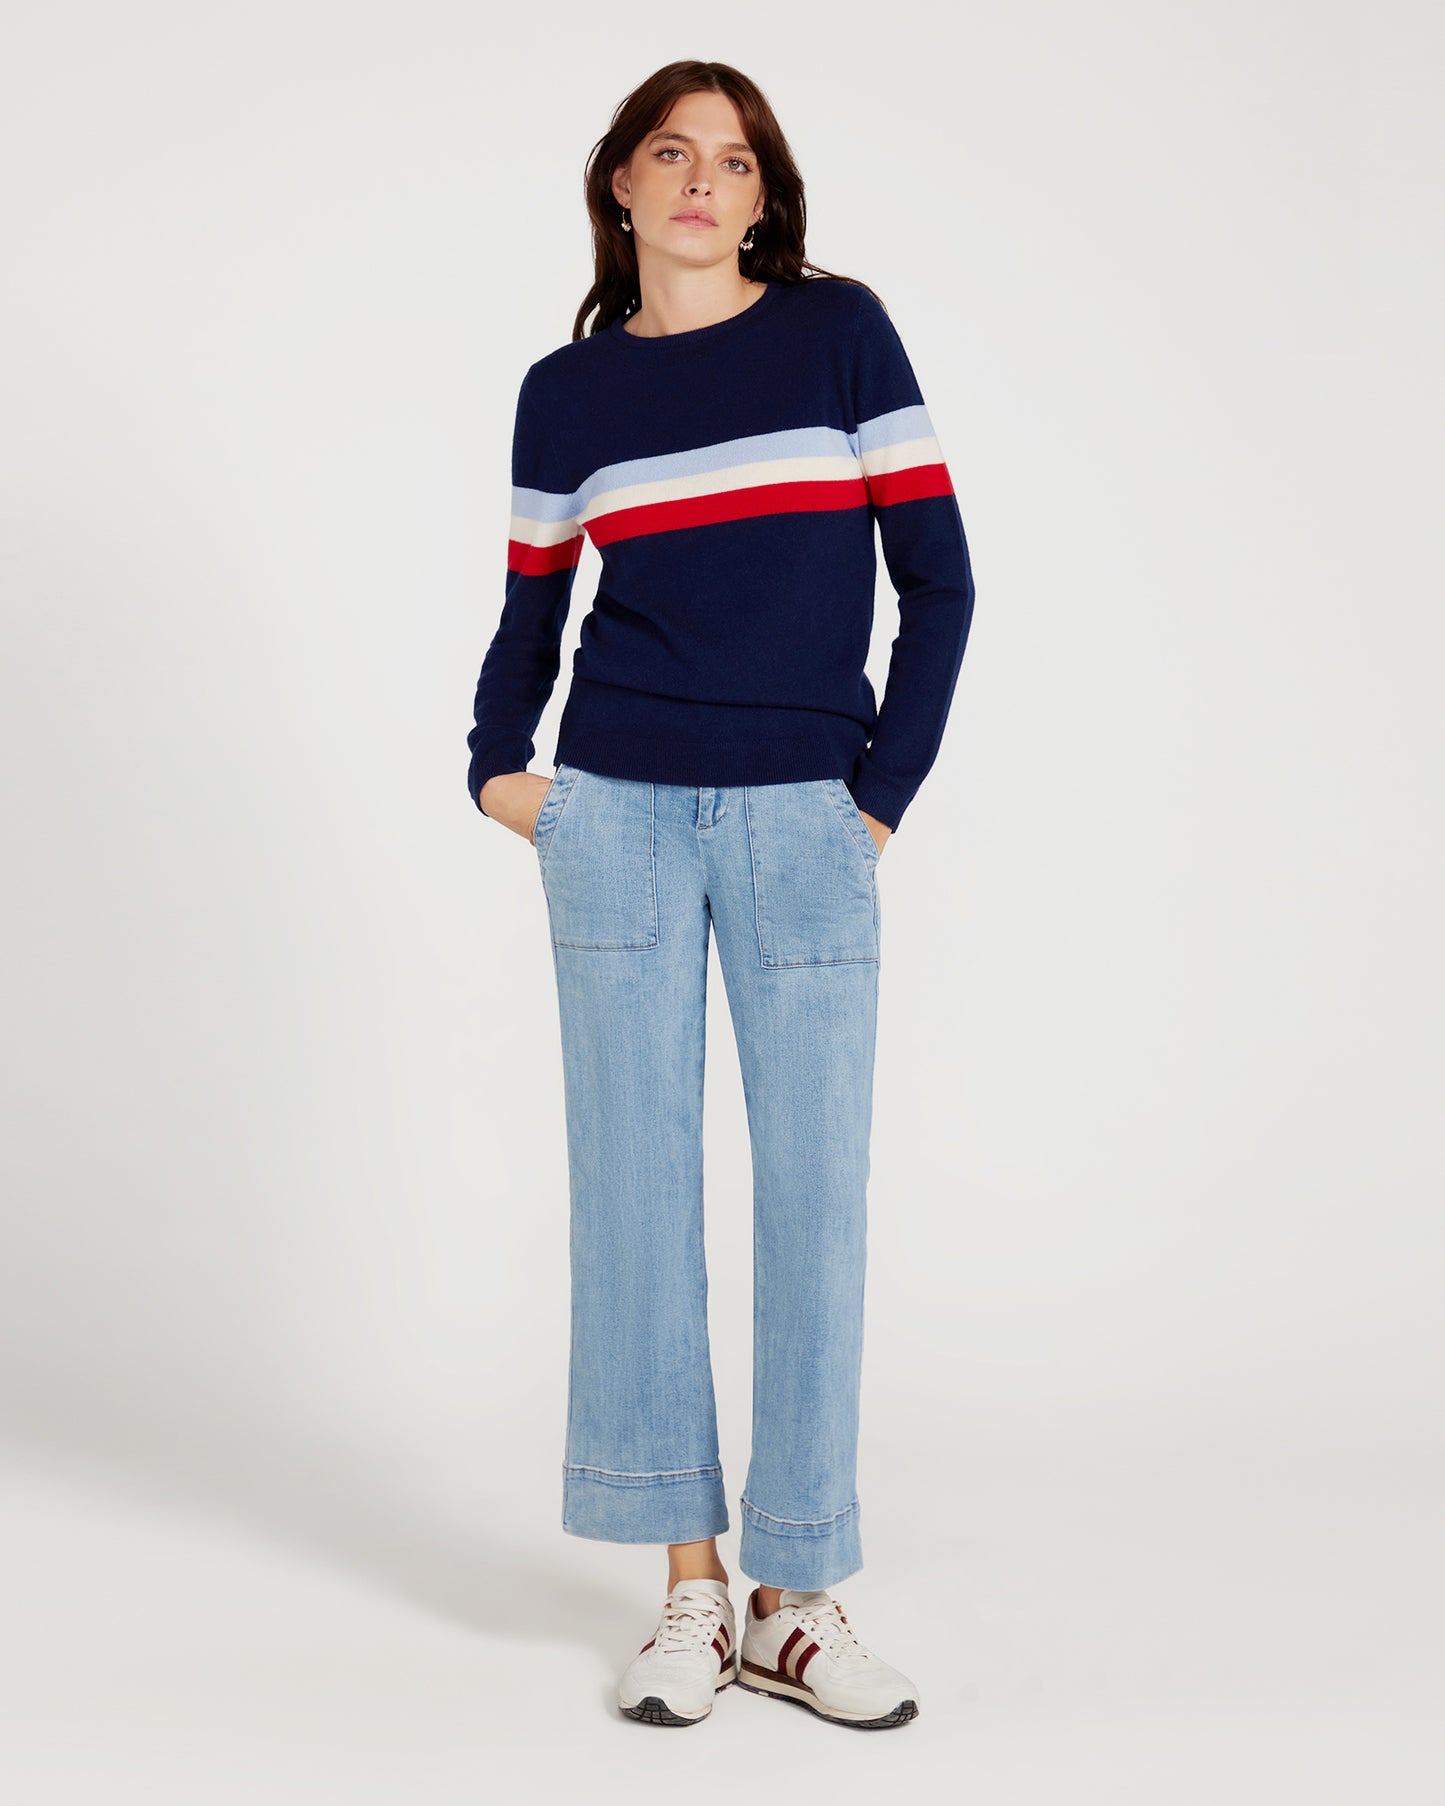 Cashmere & Wool French Racer Crewneck Sweater - NAVY BLUE